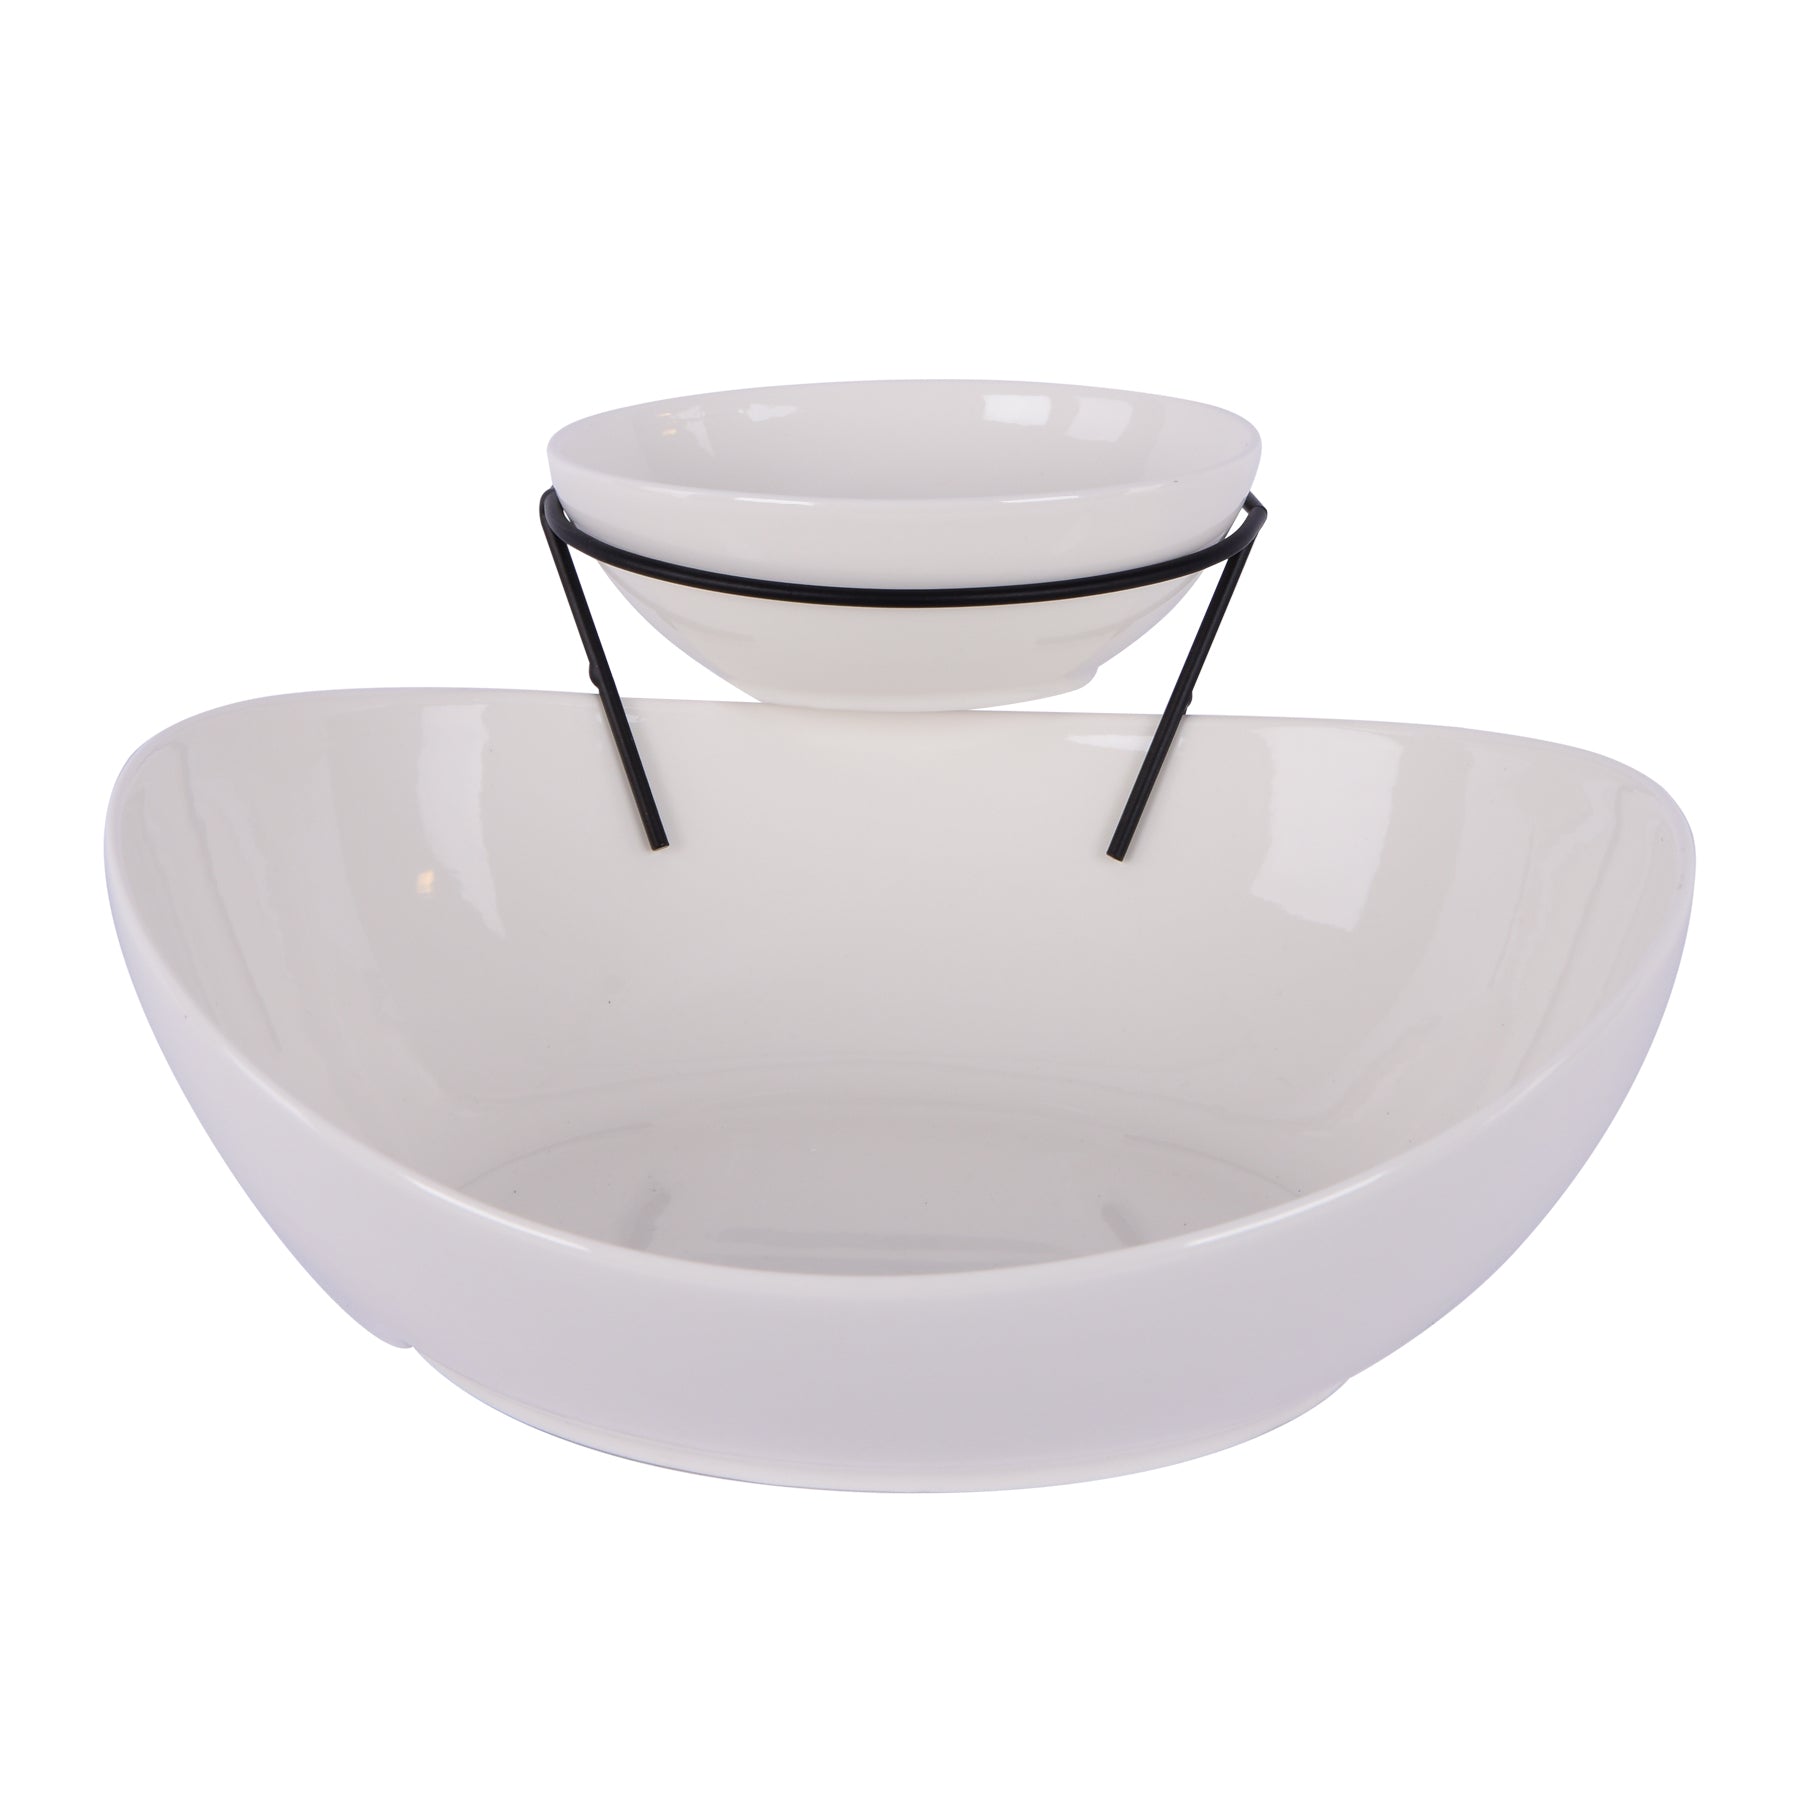 2 Pcs Oval Bowl with stand, White